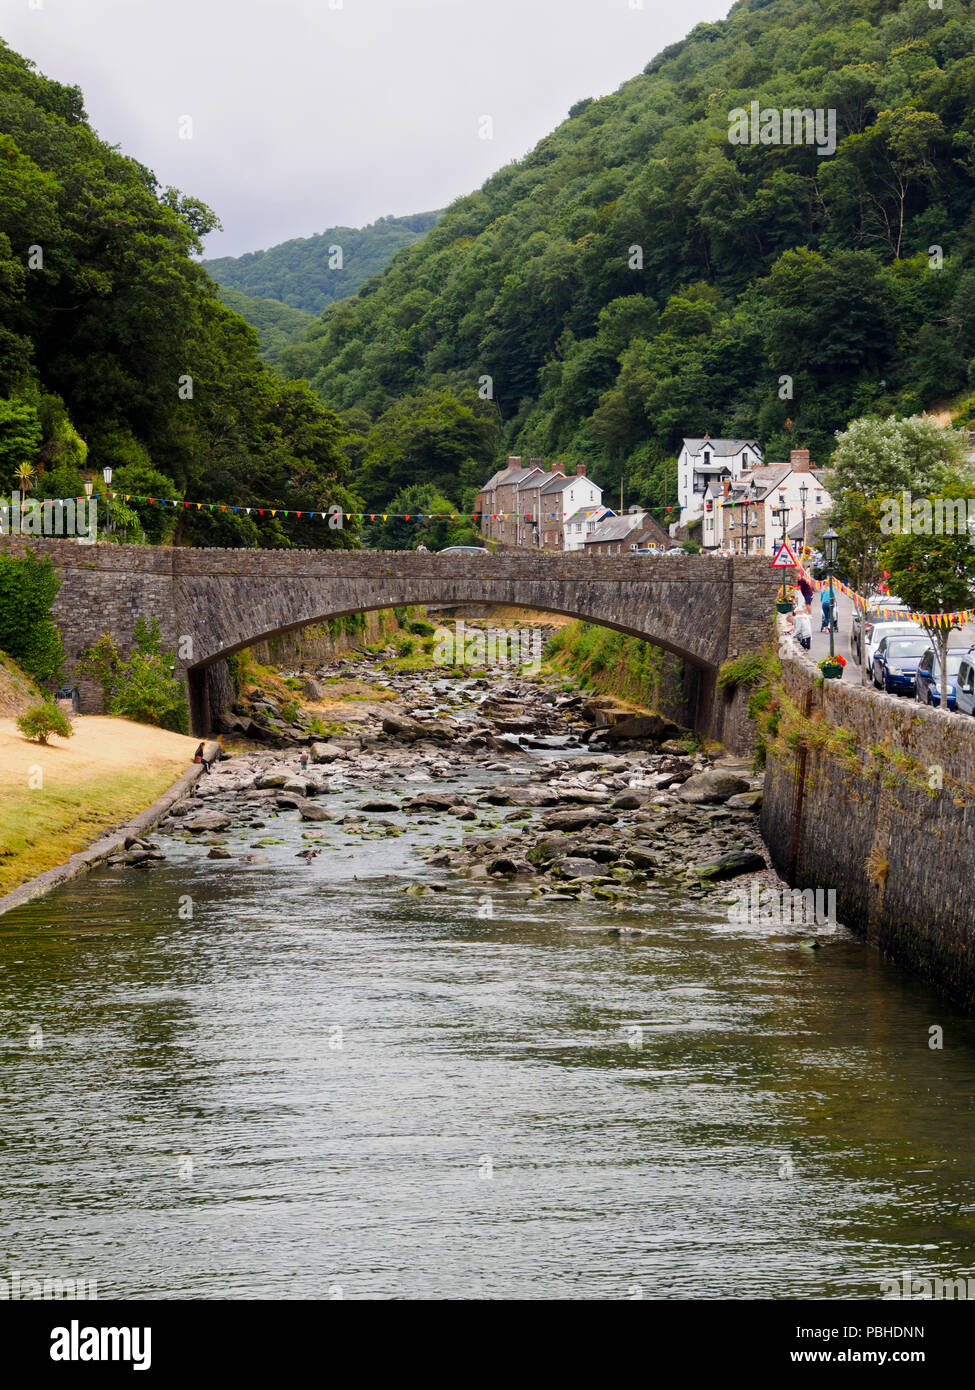 A39 Road bridge arches over the boulder strewn East Lyn river at Lynmouth, Devon, UK Stock Photo